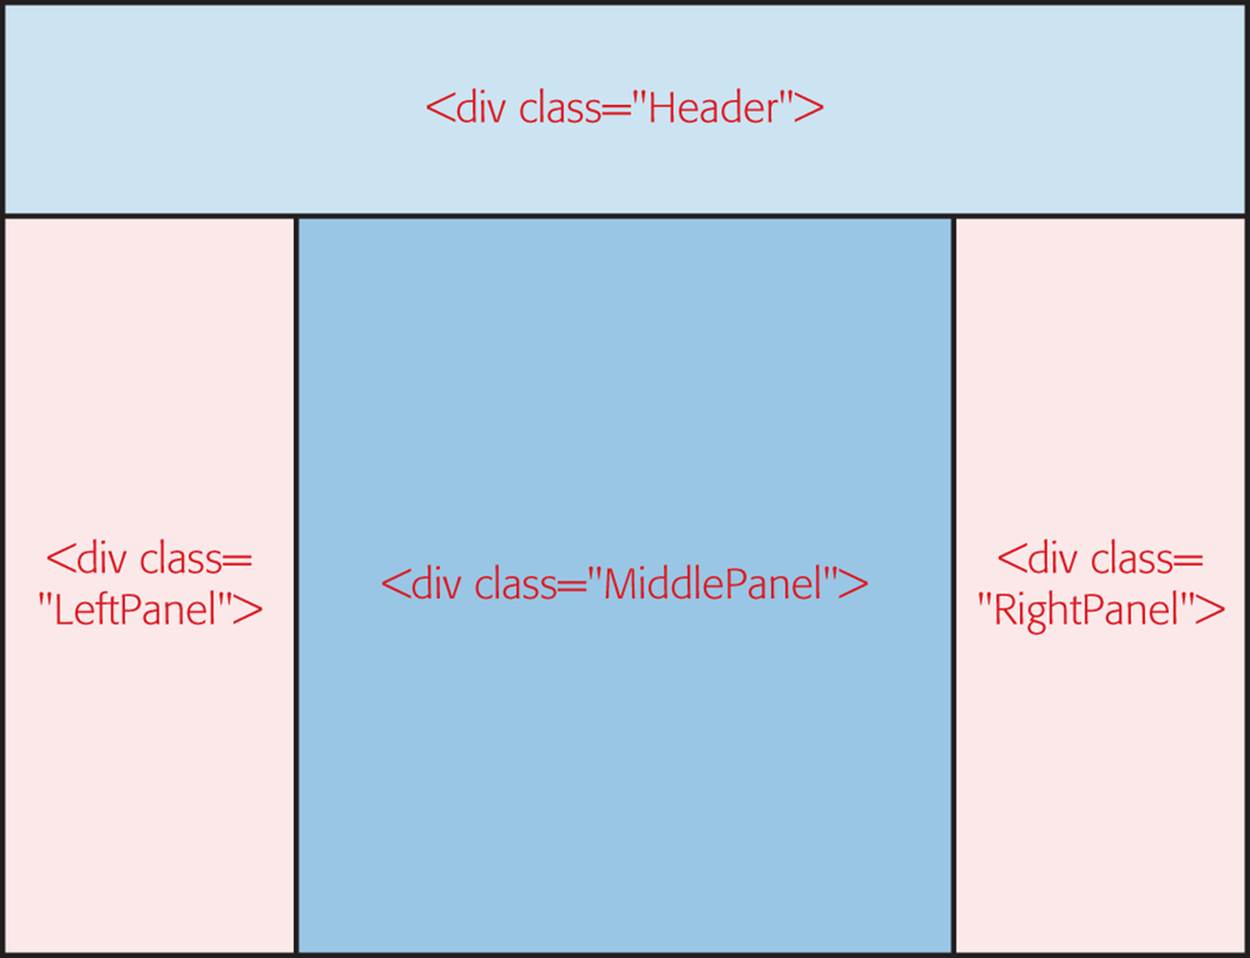 Here, a grouping of four <div> elements creates a classic three-column page design, with a header at the top. The <div> boxes line up snugly against one another, but there’s no overlap